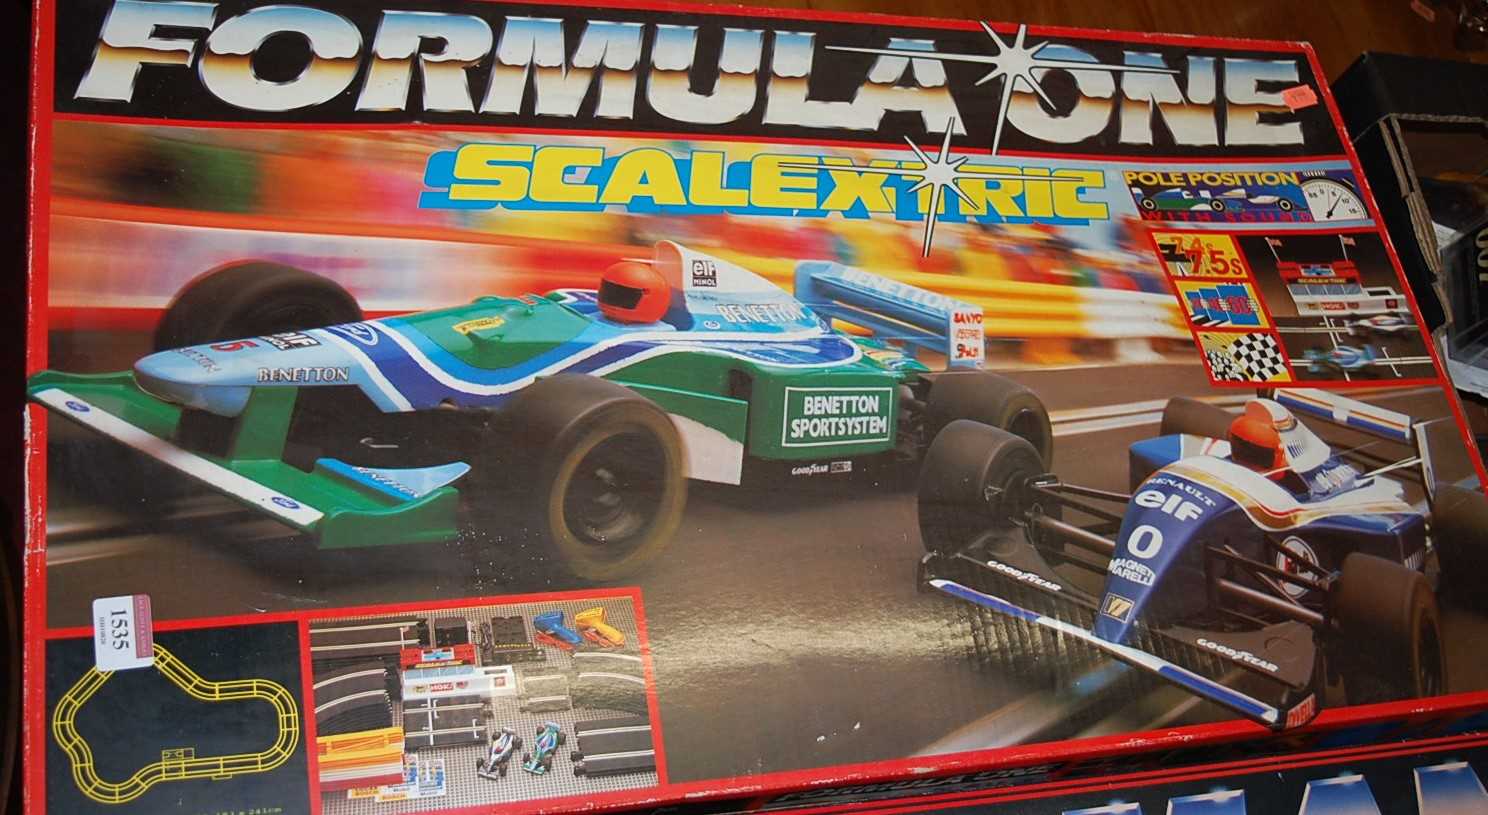 A boxed Scalextric F1 set, appears complete